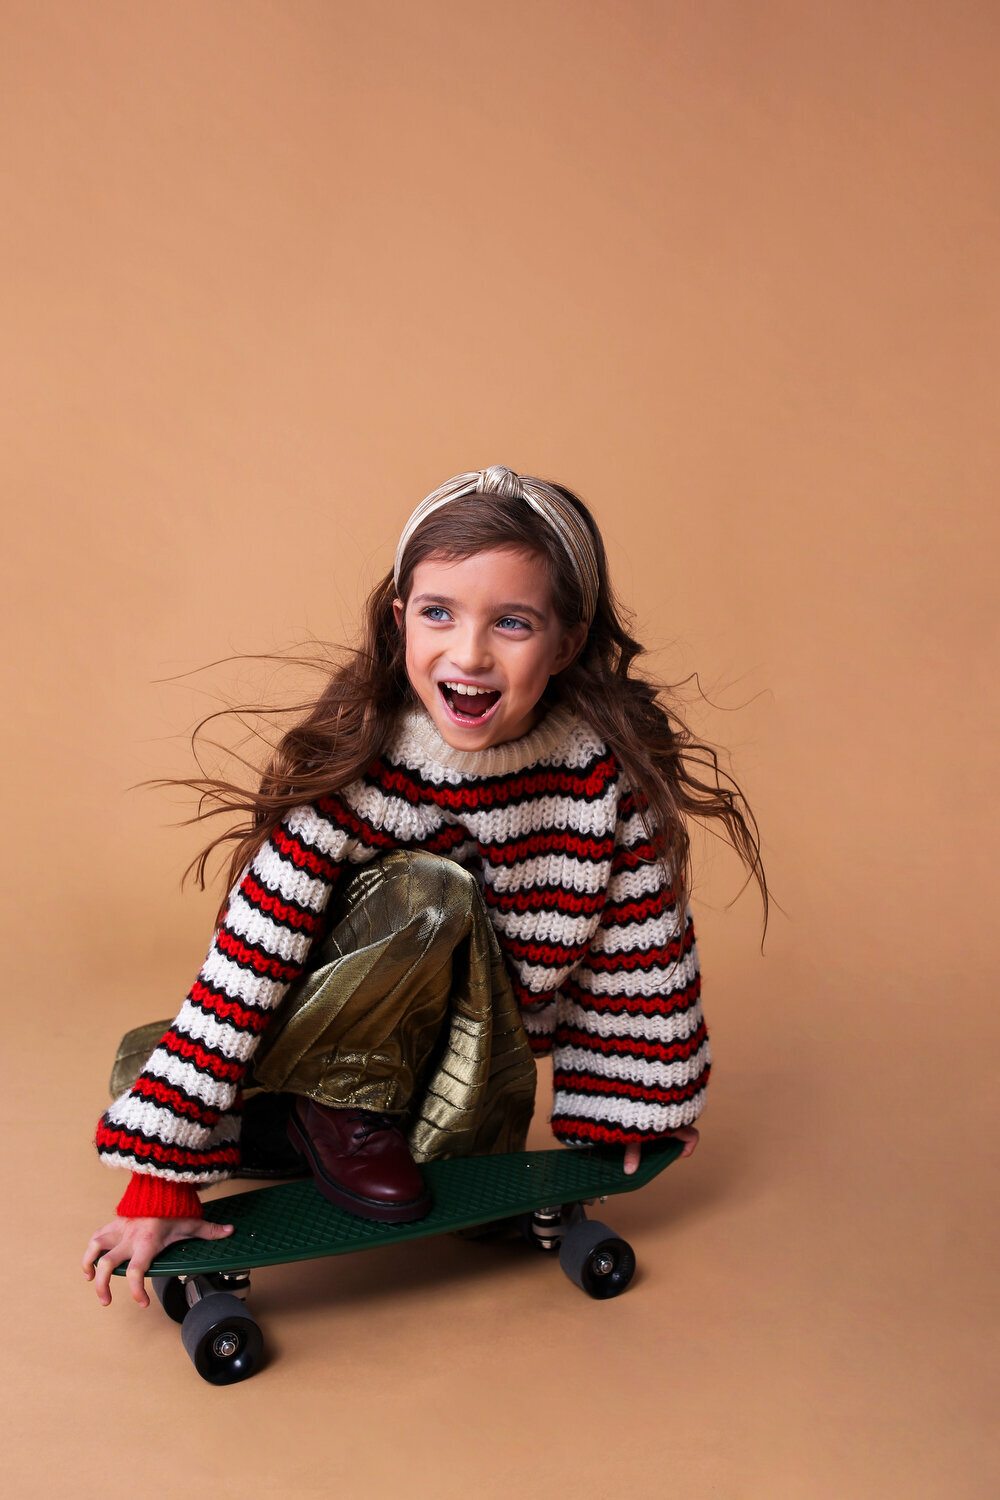 Kids in Studio Product Photography Greer Rivera Mill Valley CA